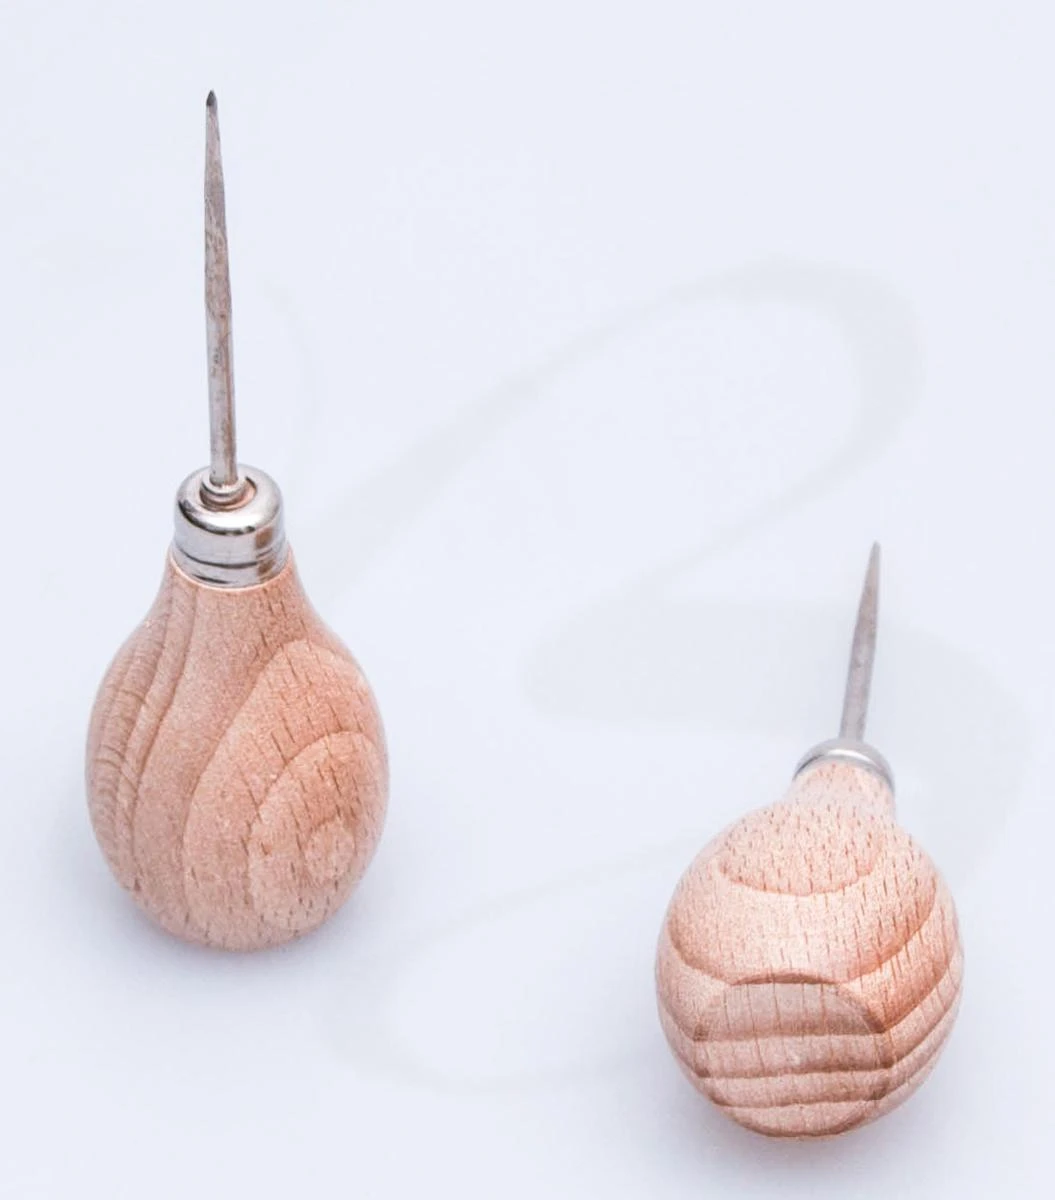 ROUND BALL AWL WOODEN HANDLE 